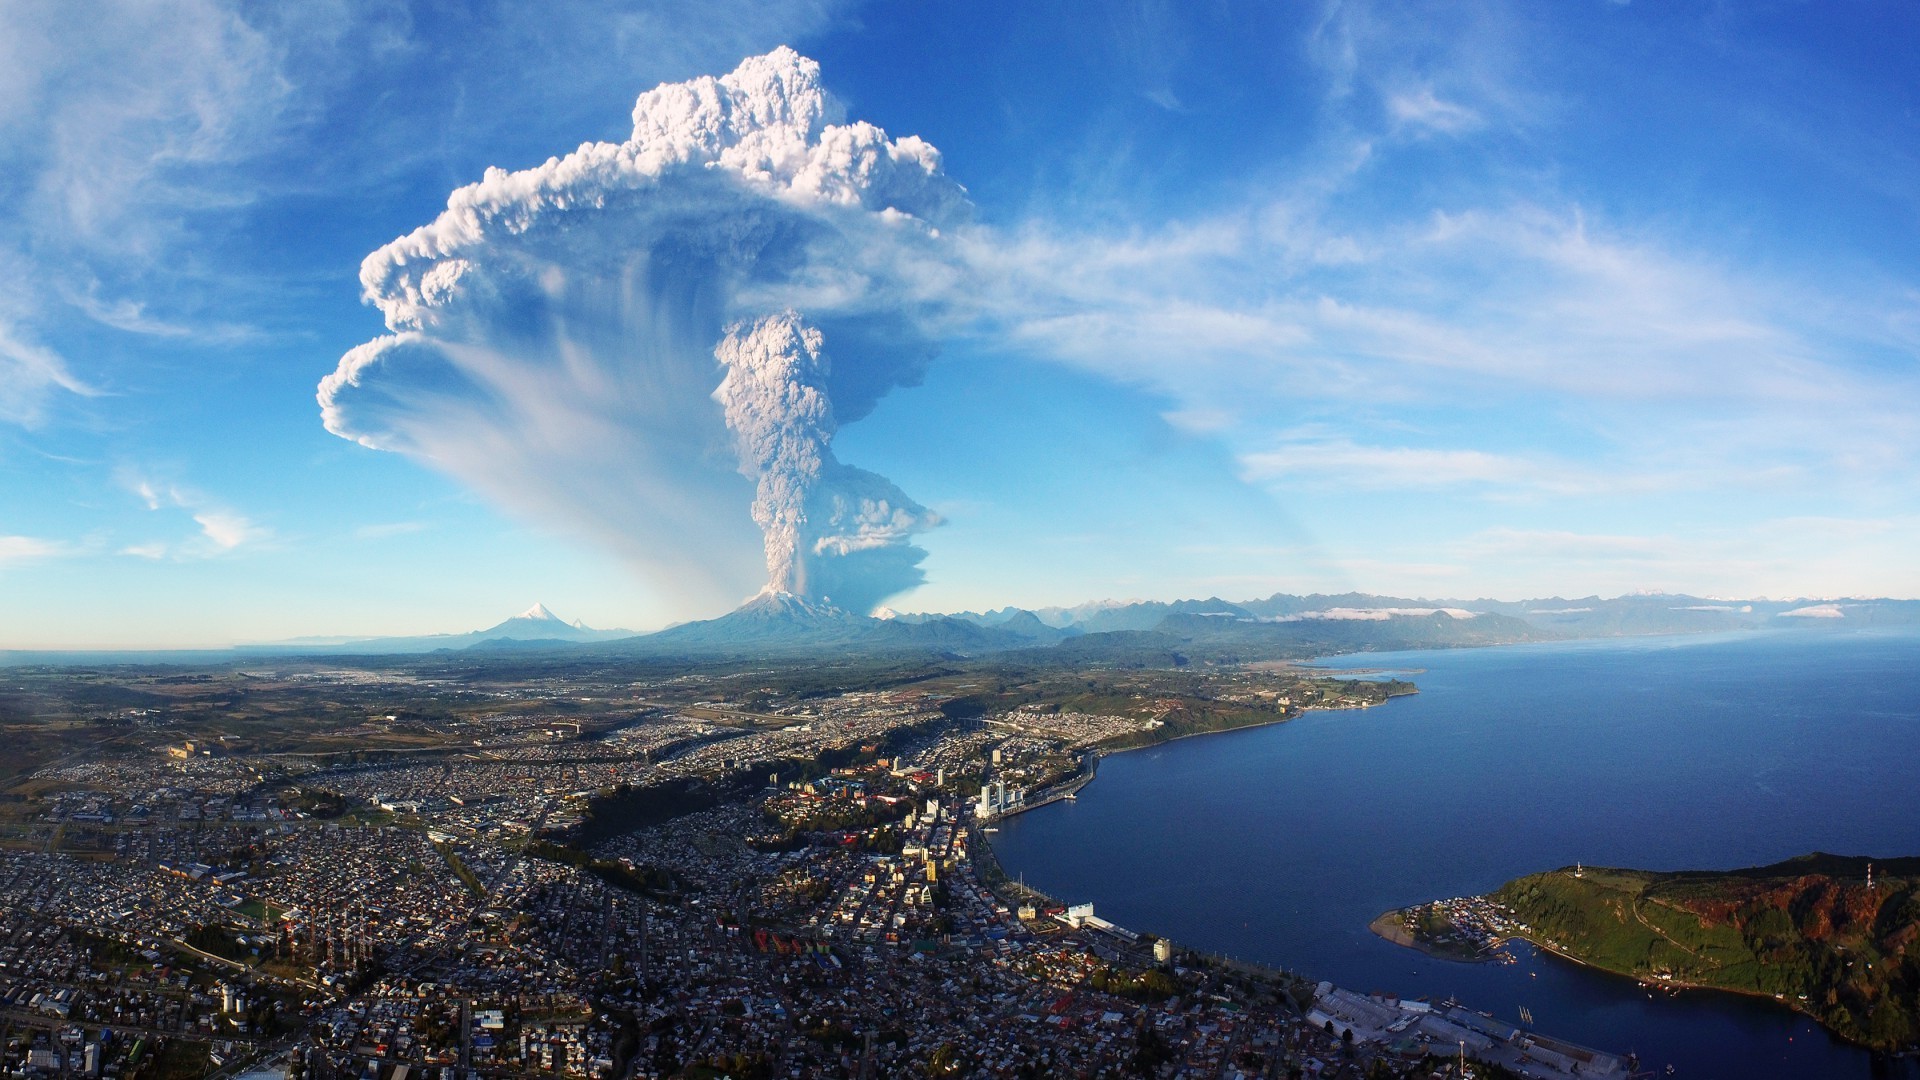 cityscape, City, Building, Chile, Nature, Volcano, Eruption, Smoke, Mountain, Snowy Peak, Water, Sea, Hill, House, Clouds, Birds Eye View, Aerial View, Coast Wallpaper